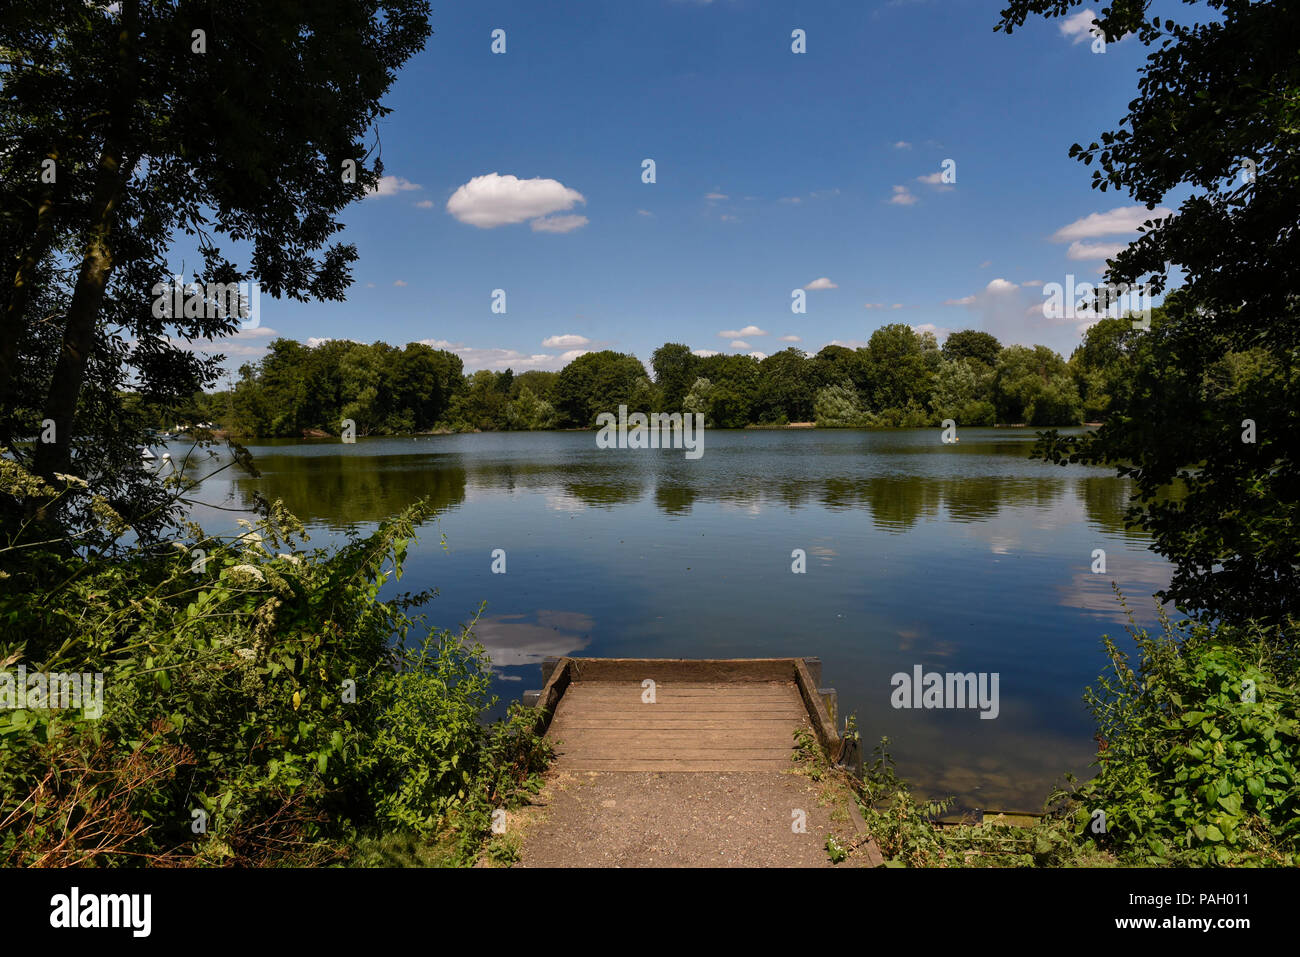 London, UK.  23 June 2018.  Reflections at Bury Lake during hot weather at Rickmansworth Aquadrome in north west London, on a day when temperatures reached 30C.  Temperatures up to 35C are forecast for the rest of the week during the current heatwave. Credit: Stephen Chung / Alamy Live News Stock Photo